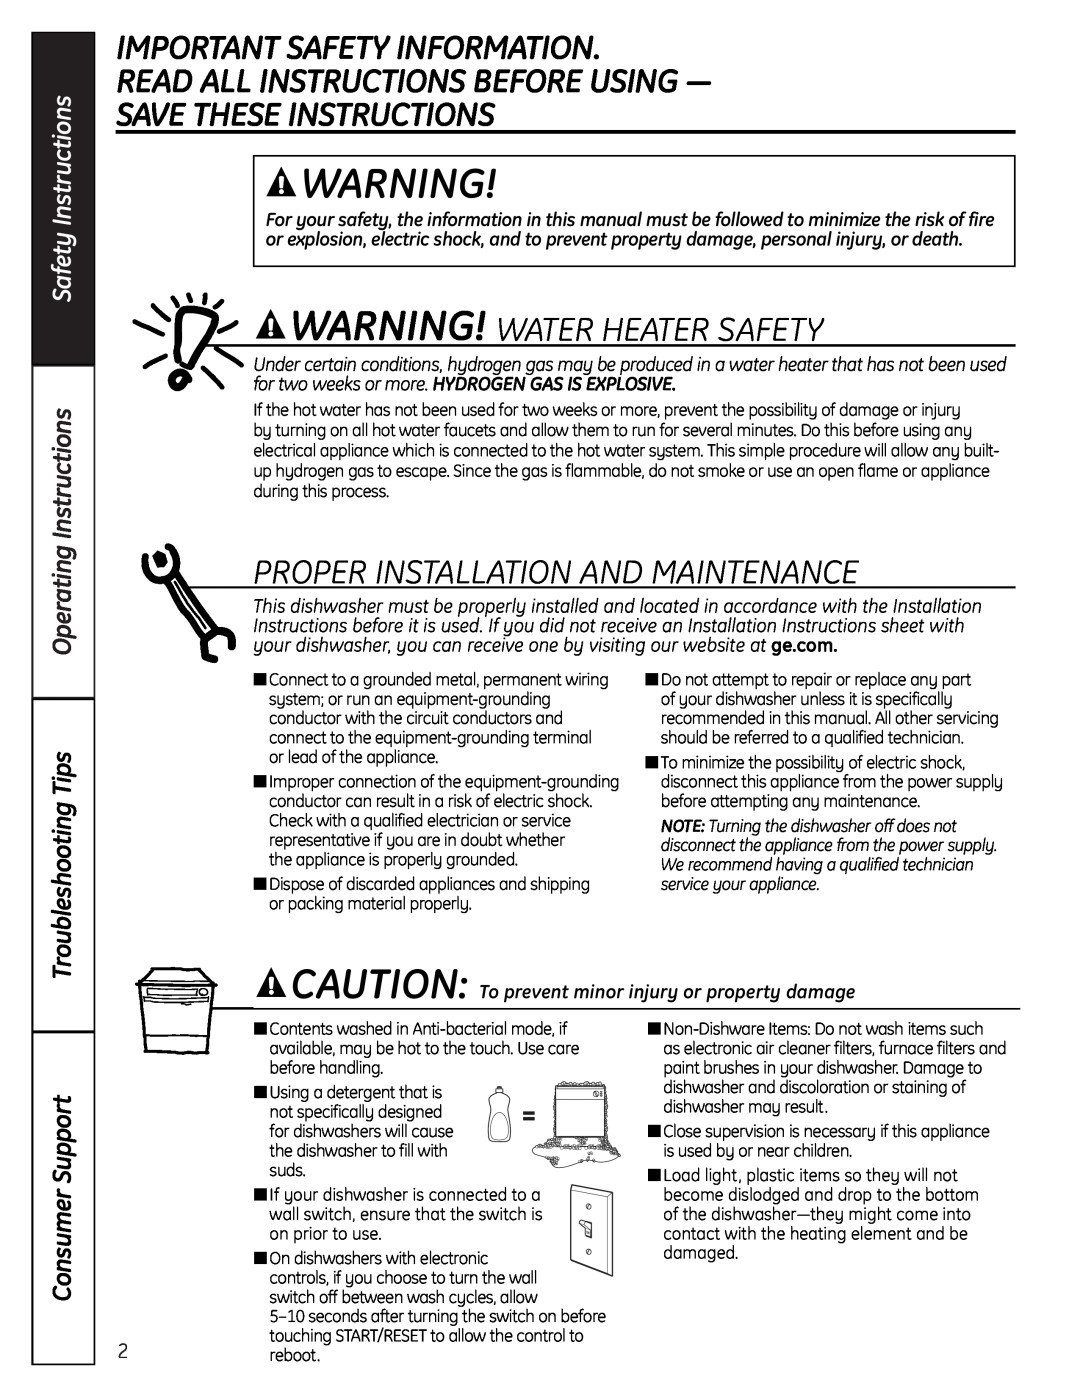 GE GHDA696P Important Safety Information, Read All Instructions Before Using, Save These Instructions, Safety Instructions 